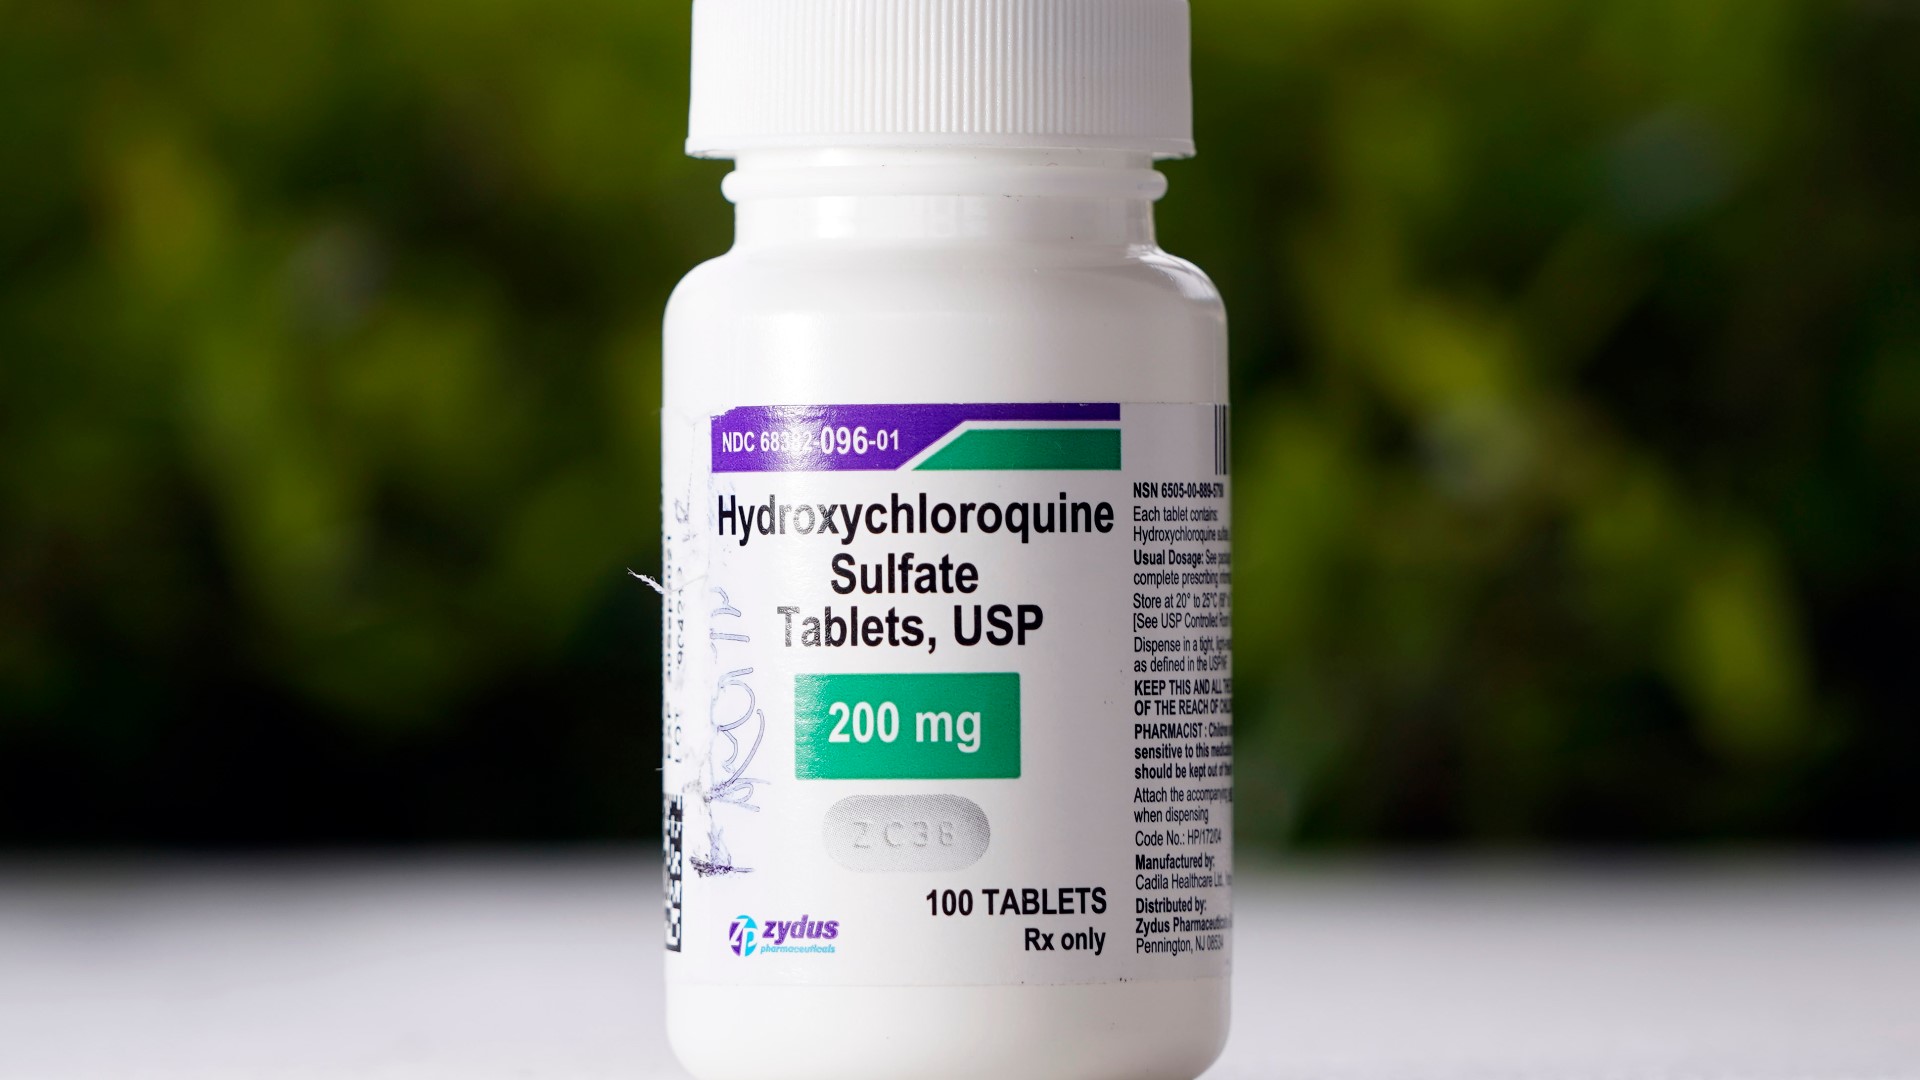 The AMA still urges physicians not to prescribe hydroxychloroquine for COVID-19 treatment.